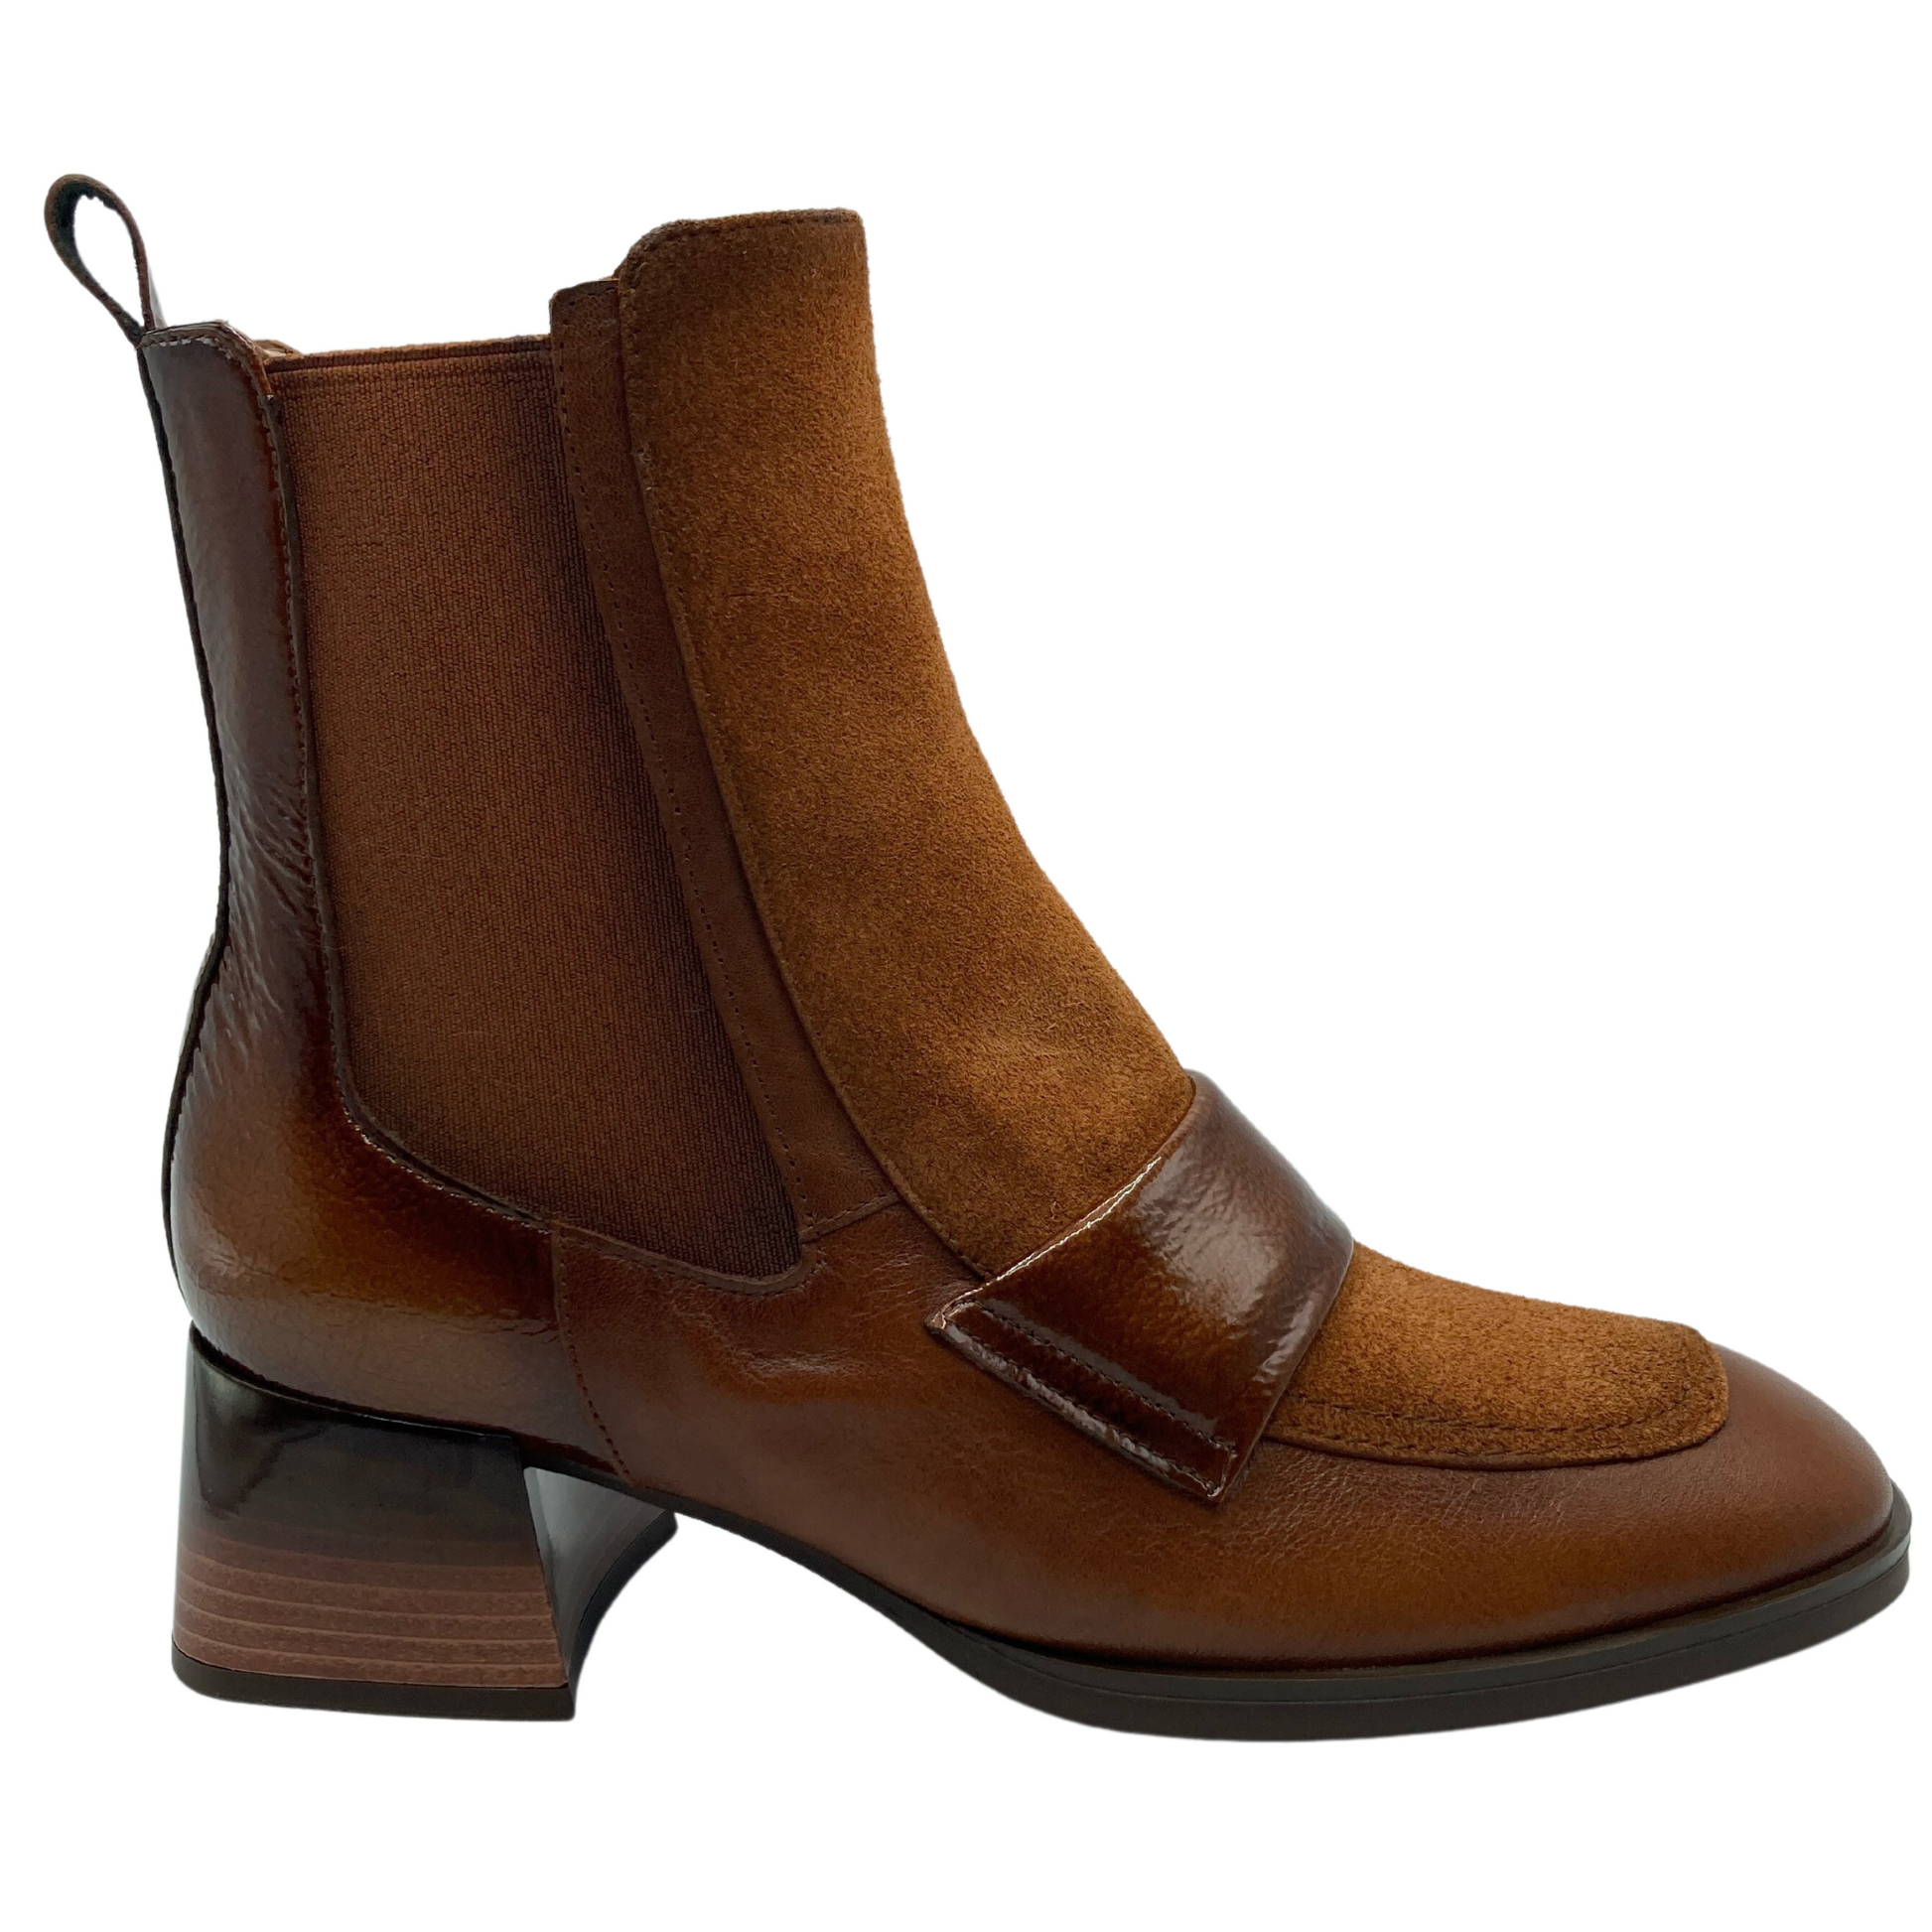 Right facing view of brown leather and suede short boot with elasticated side gore and block heel